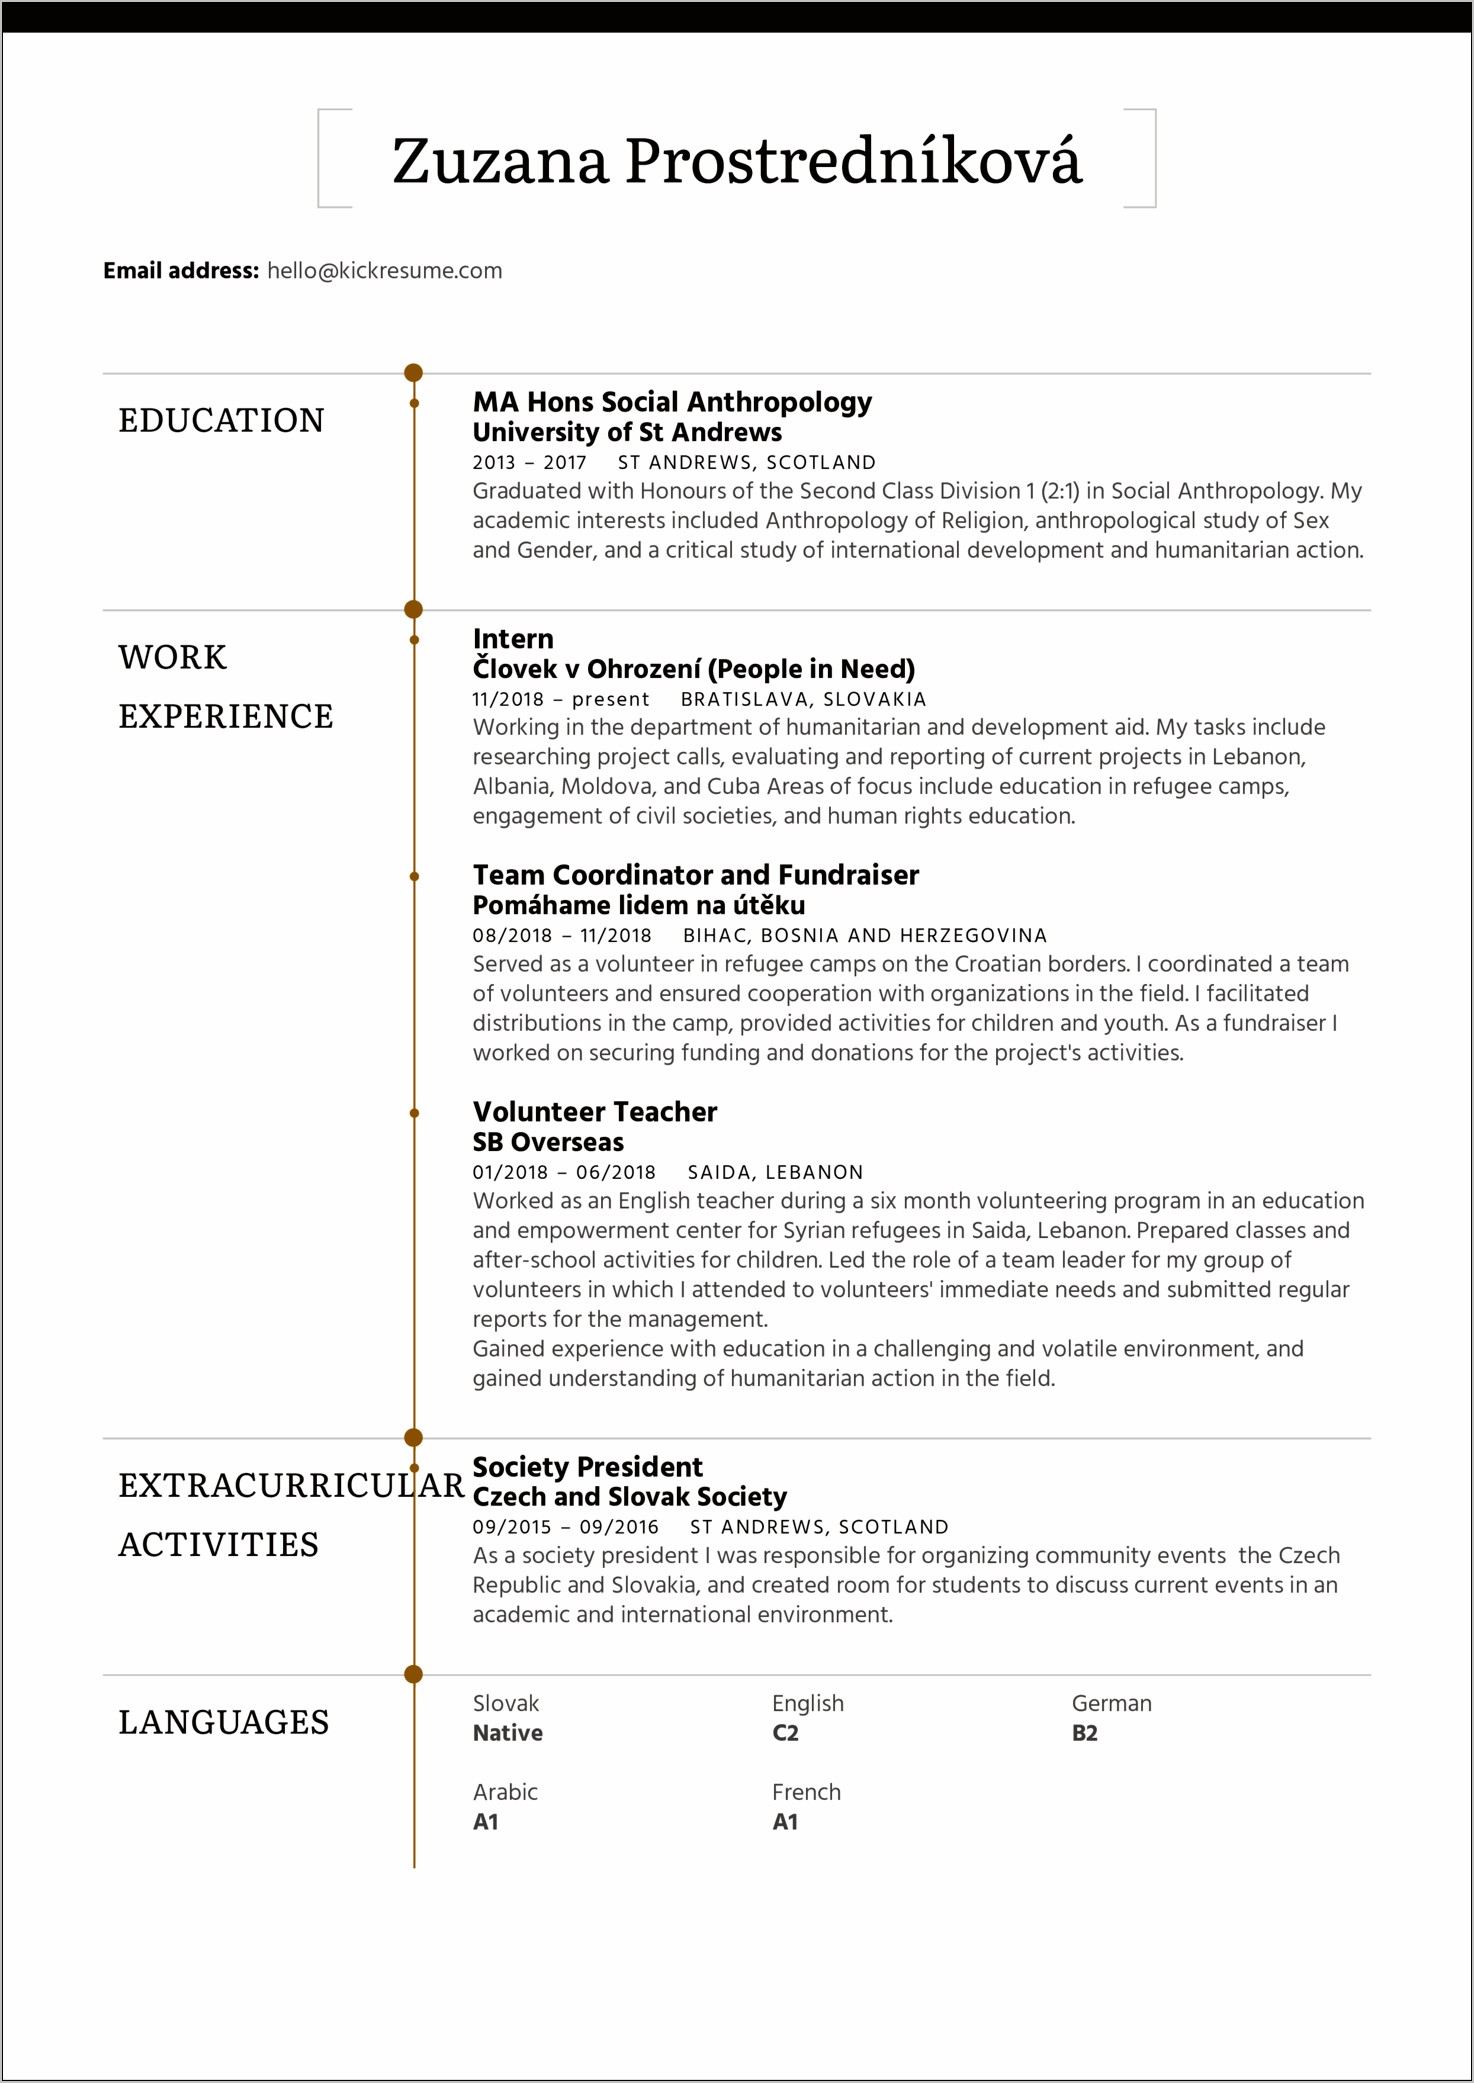 Resume Volunteer Experience Current Year To Present